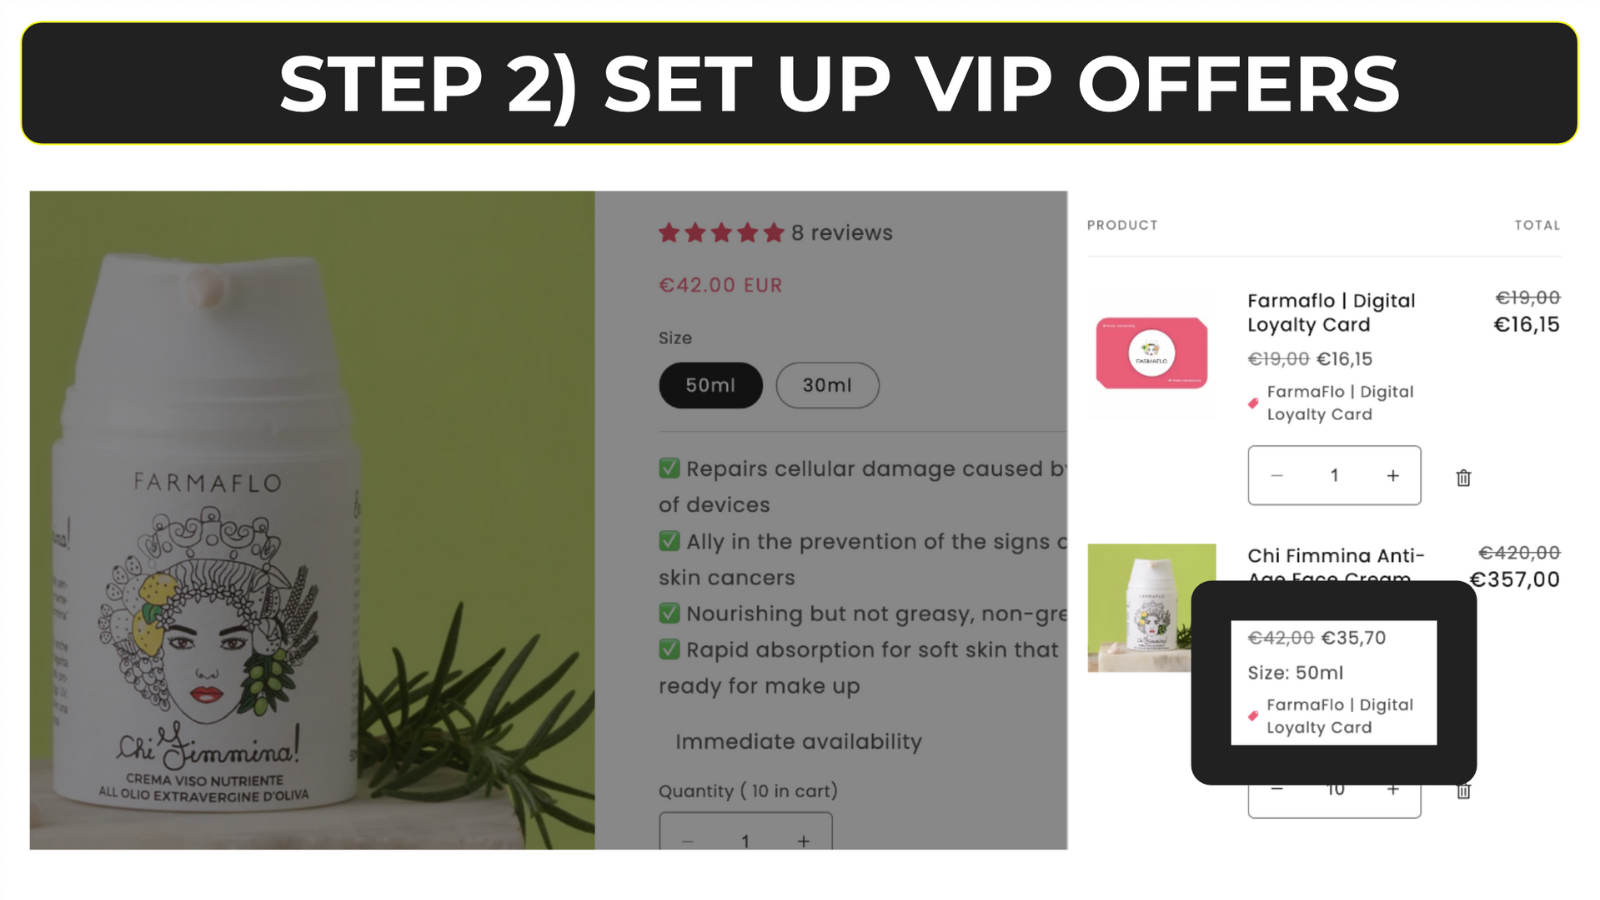 STEP 2) SET UP VIP OFFERS